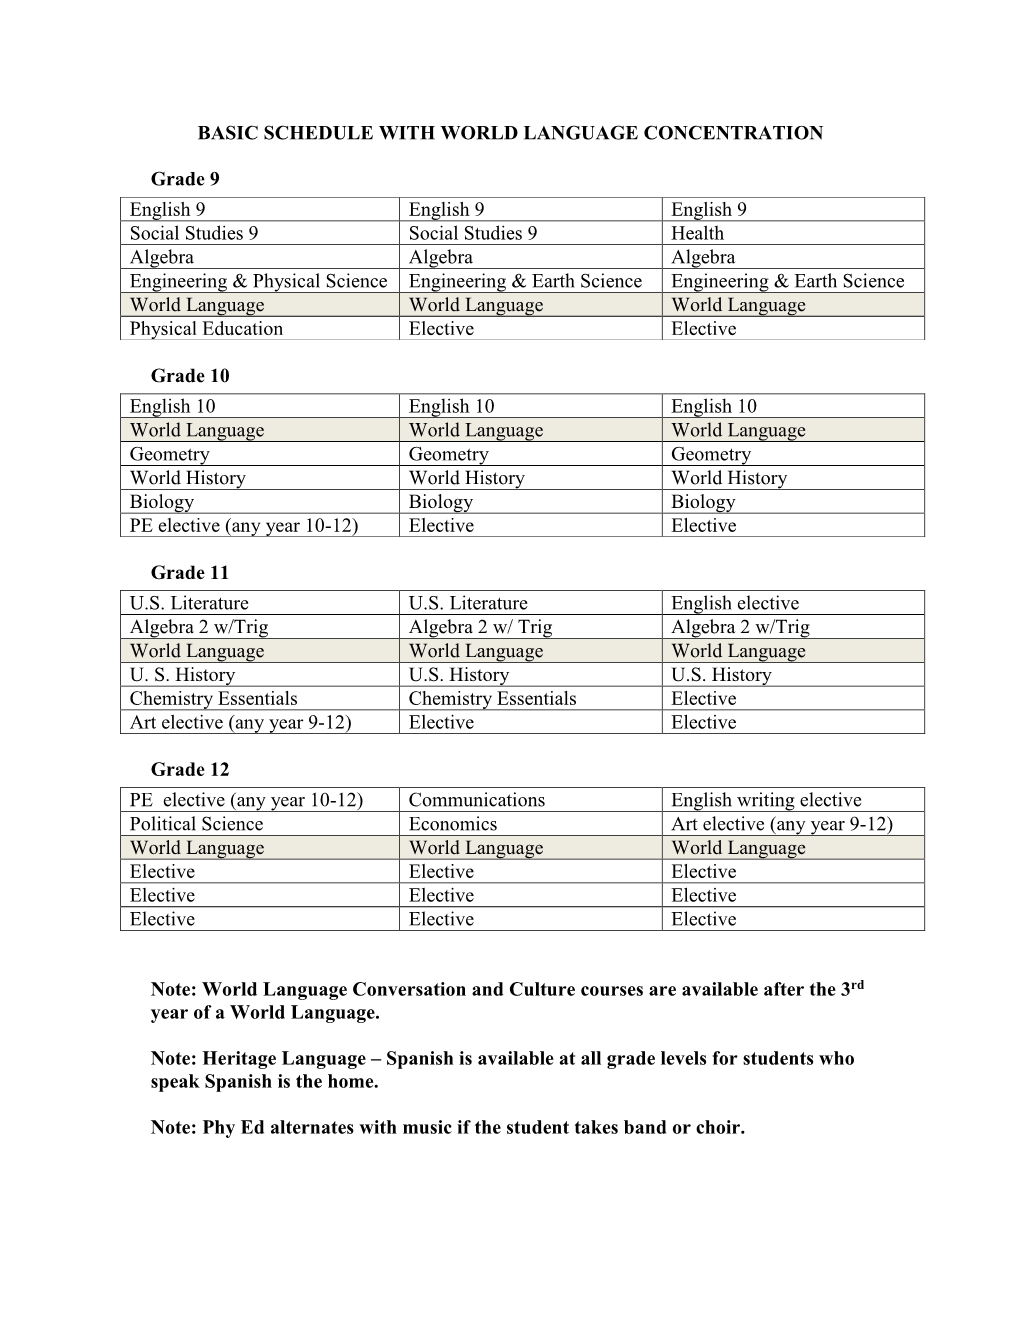 Basic Schedule with World Language Concentration